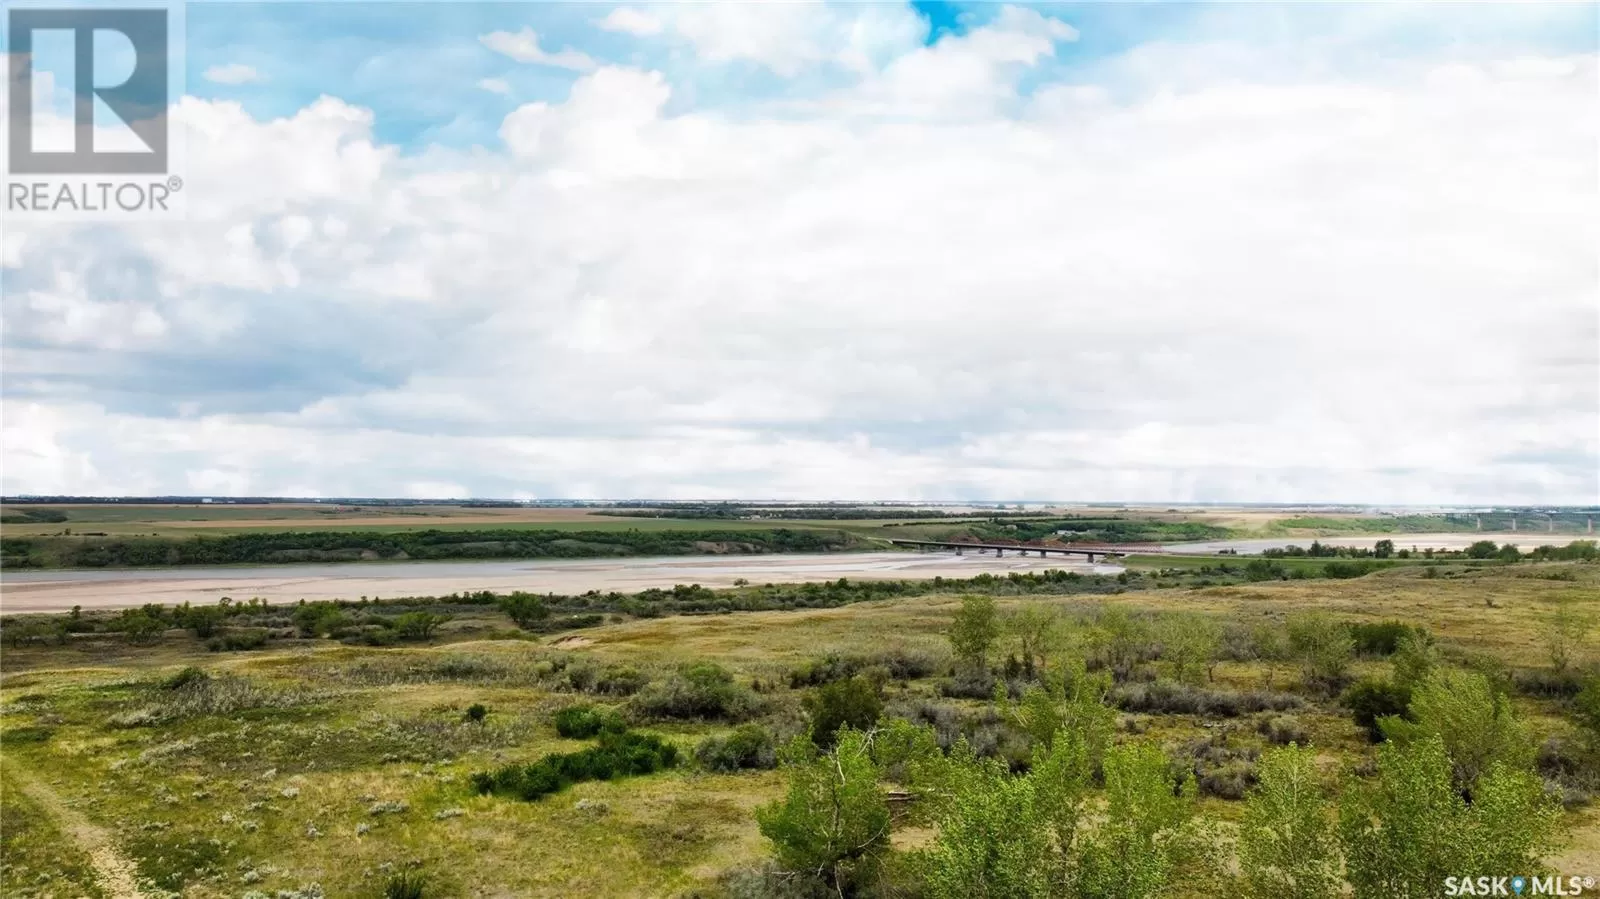 Unknown for rent: Outlook Riverview Land, Rudy Rm No. 284, Saskatchewan S0L 2N0